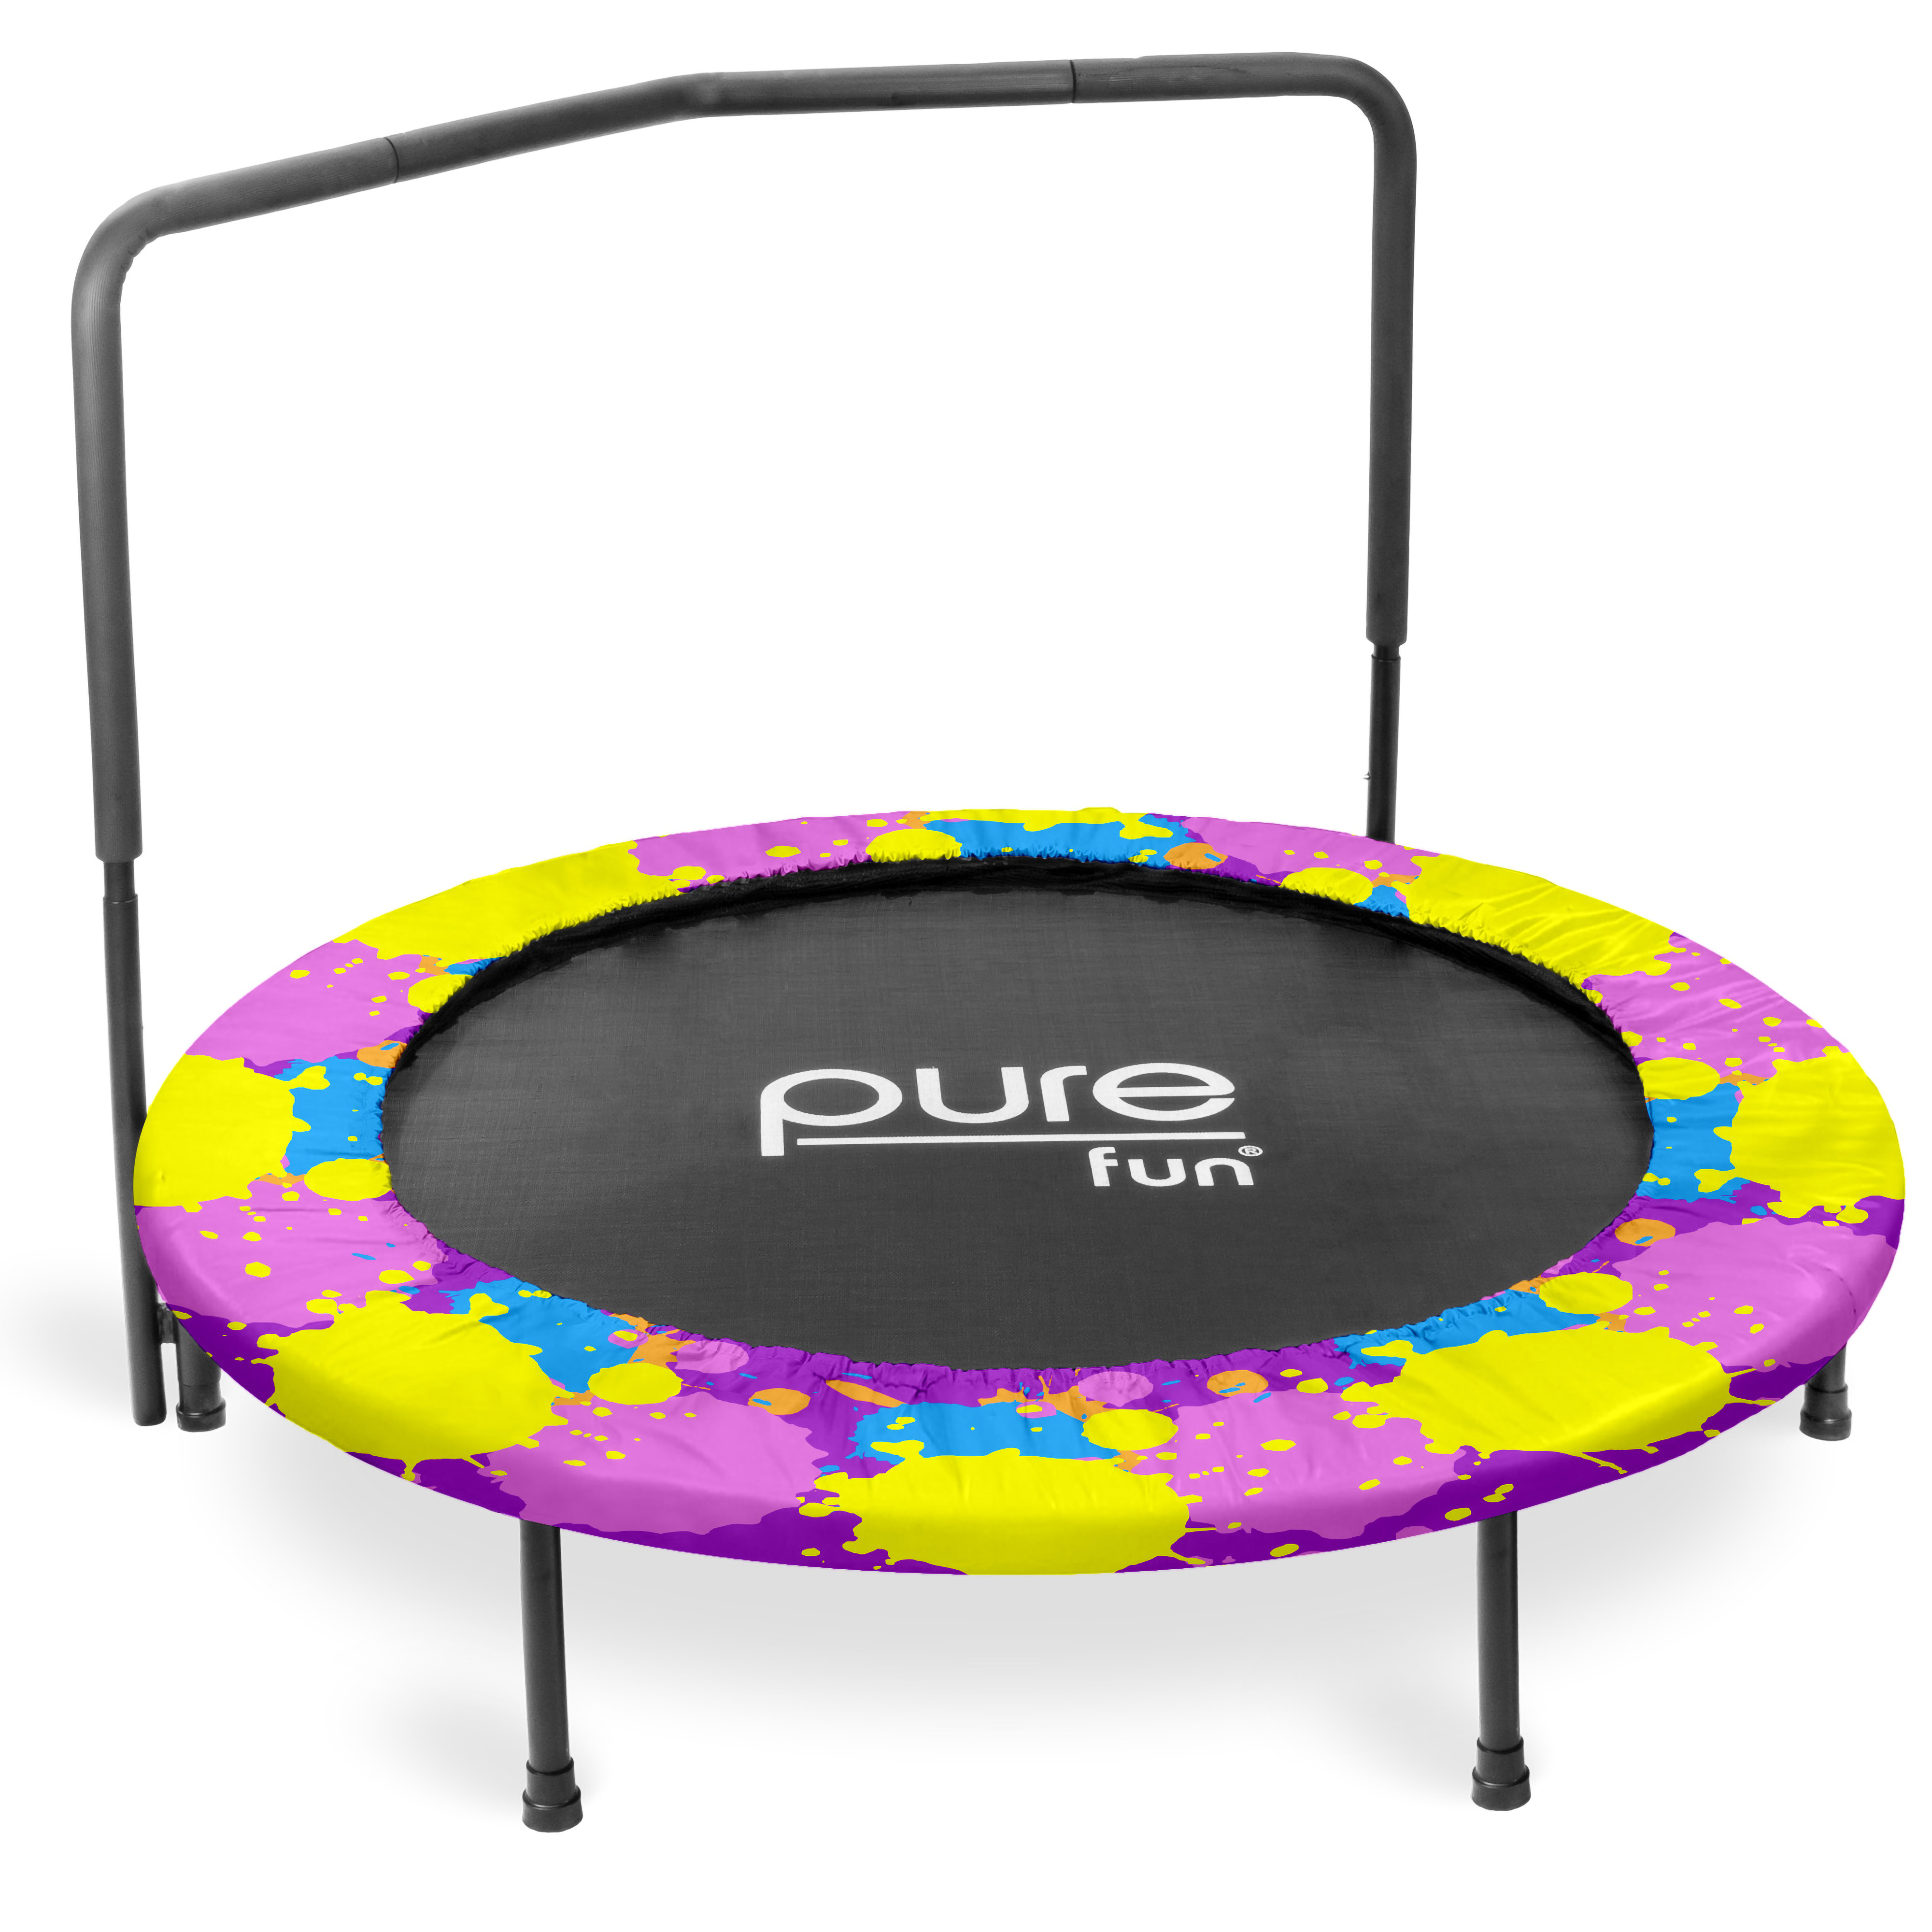 Pure Fun Super Jumper Kids 48-Inch Trampoline with Handrail, Paint - image 1 of 5